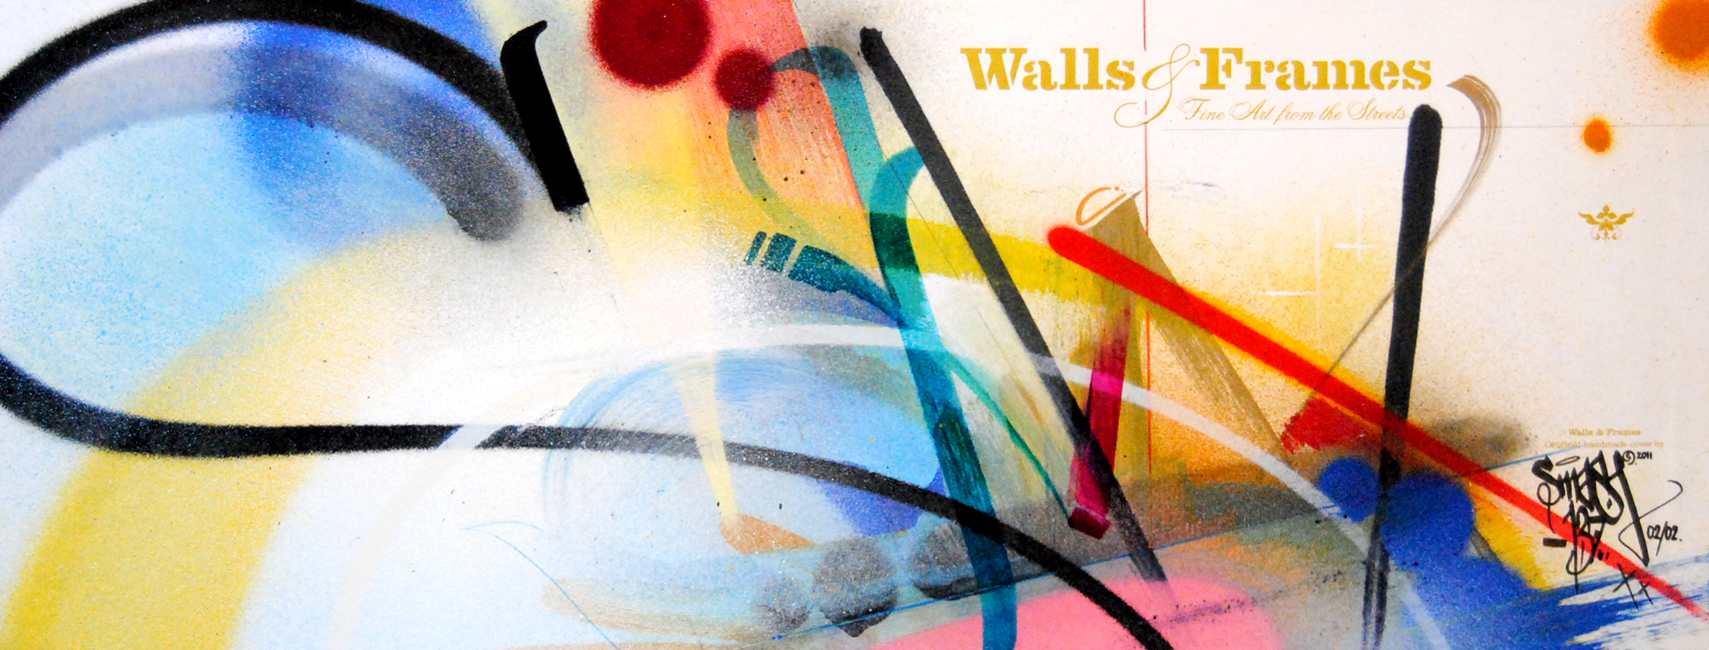 Walls-Frame Smash-137-1-Spray-paint-and-acrylic-on-paper-Switzerland